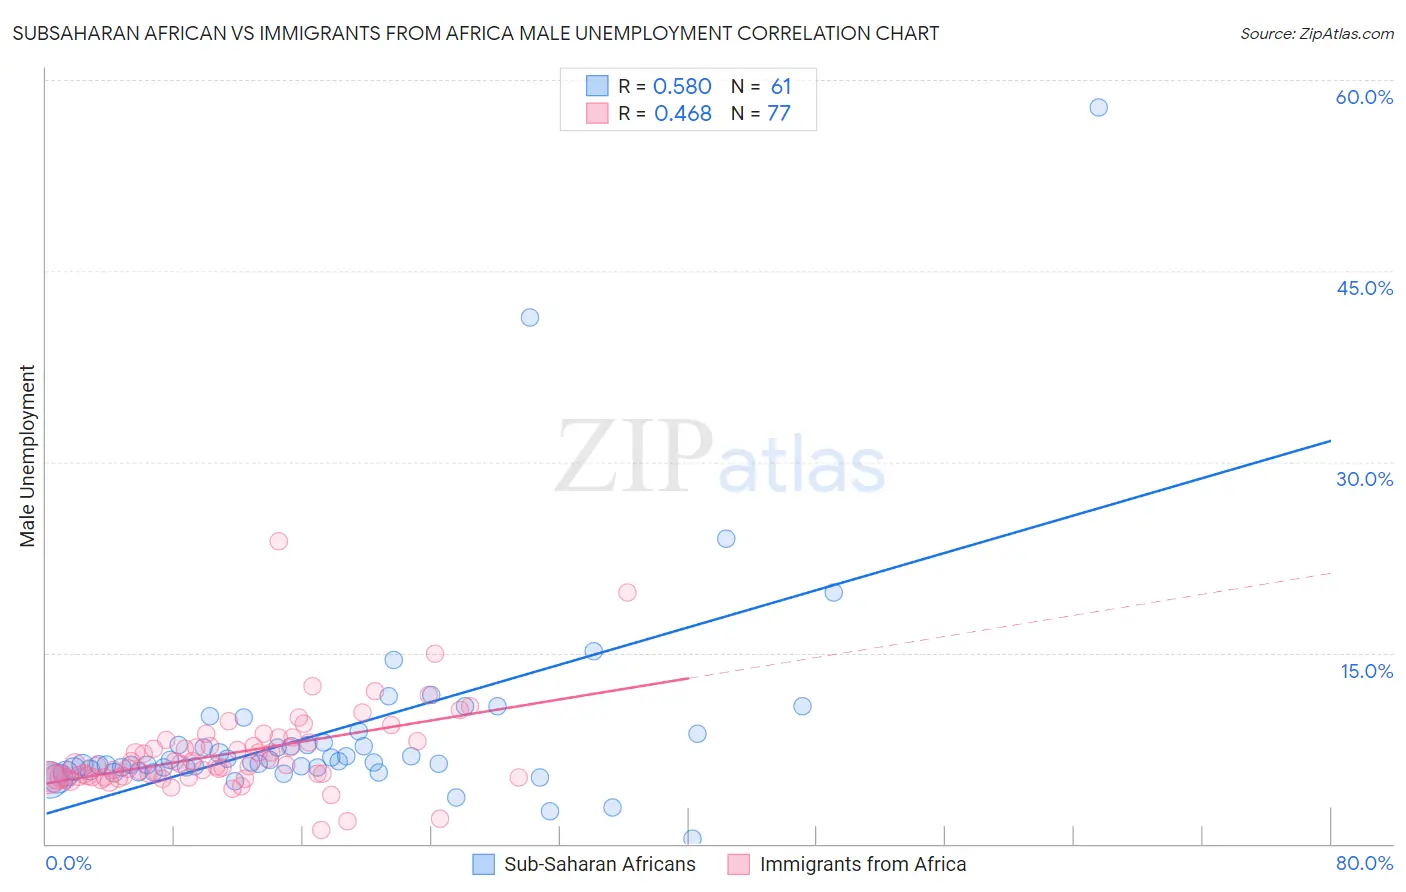 Subsaharan African vs Immigrants from Africa Male Unemployment